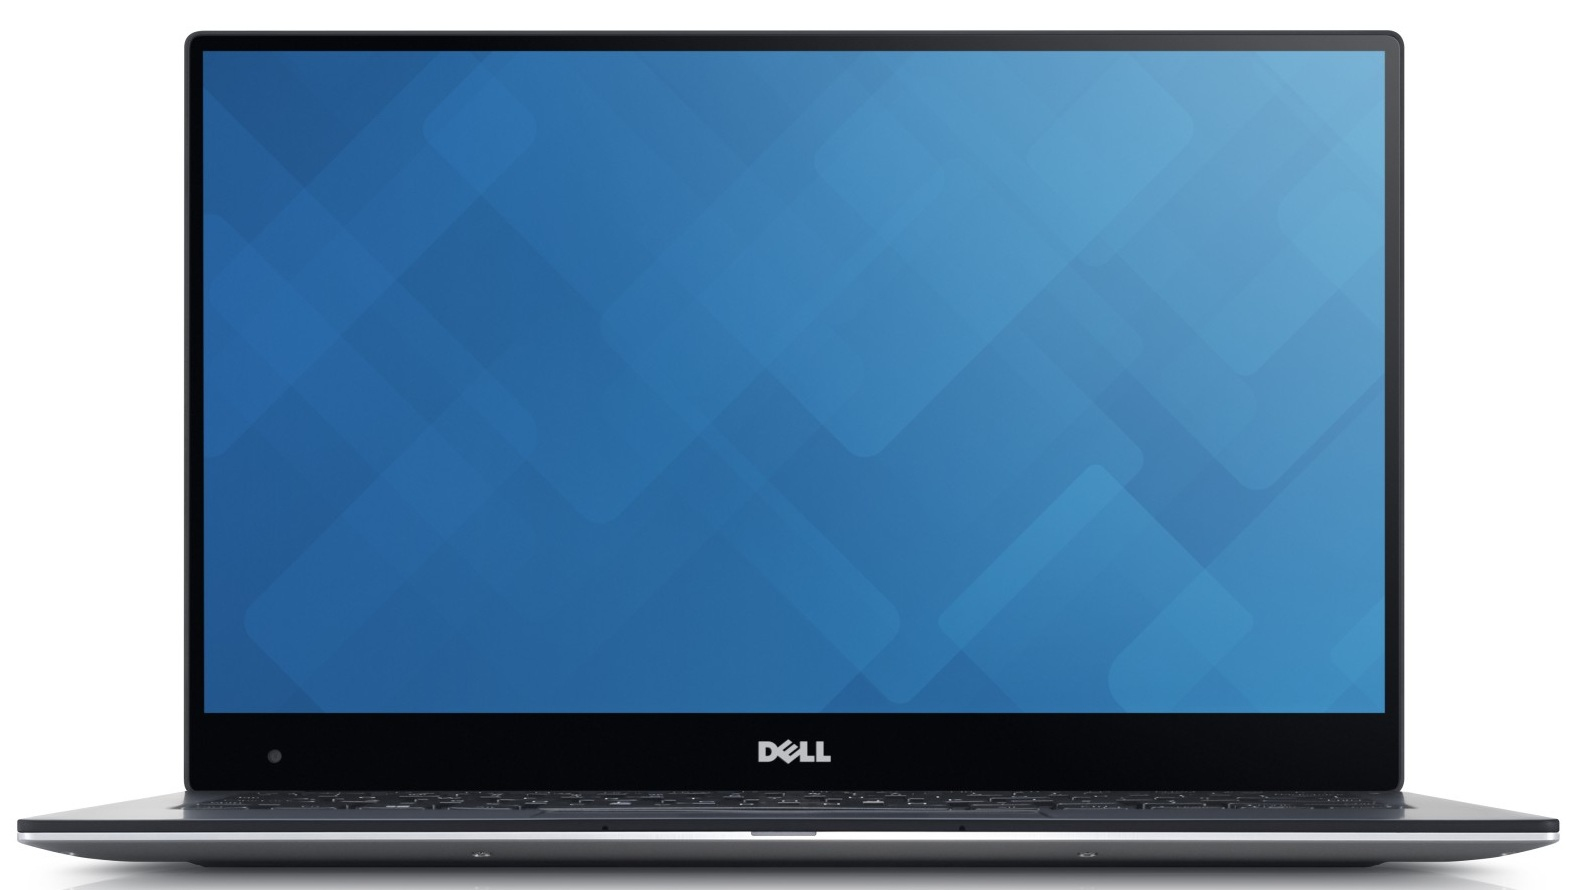 DELL XPS 9360 Laptop 1.2GHz i5-7Y54 8GB/256GB 13.3-inch Touchscreen